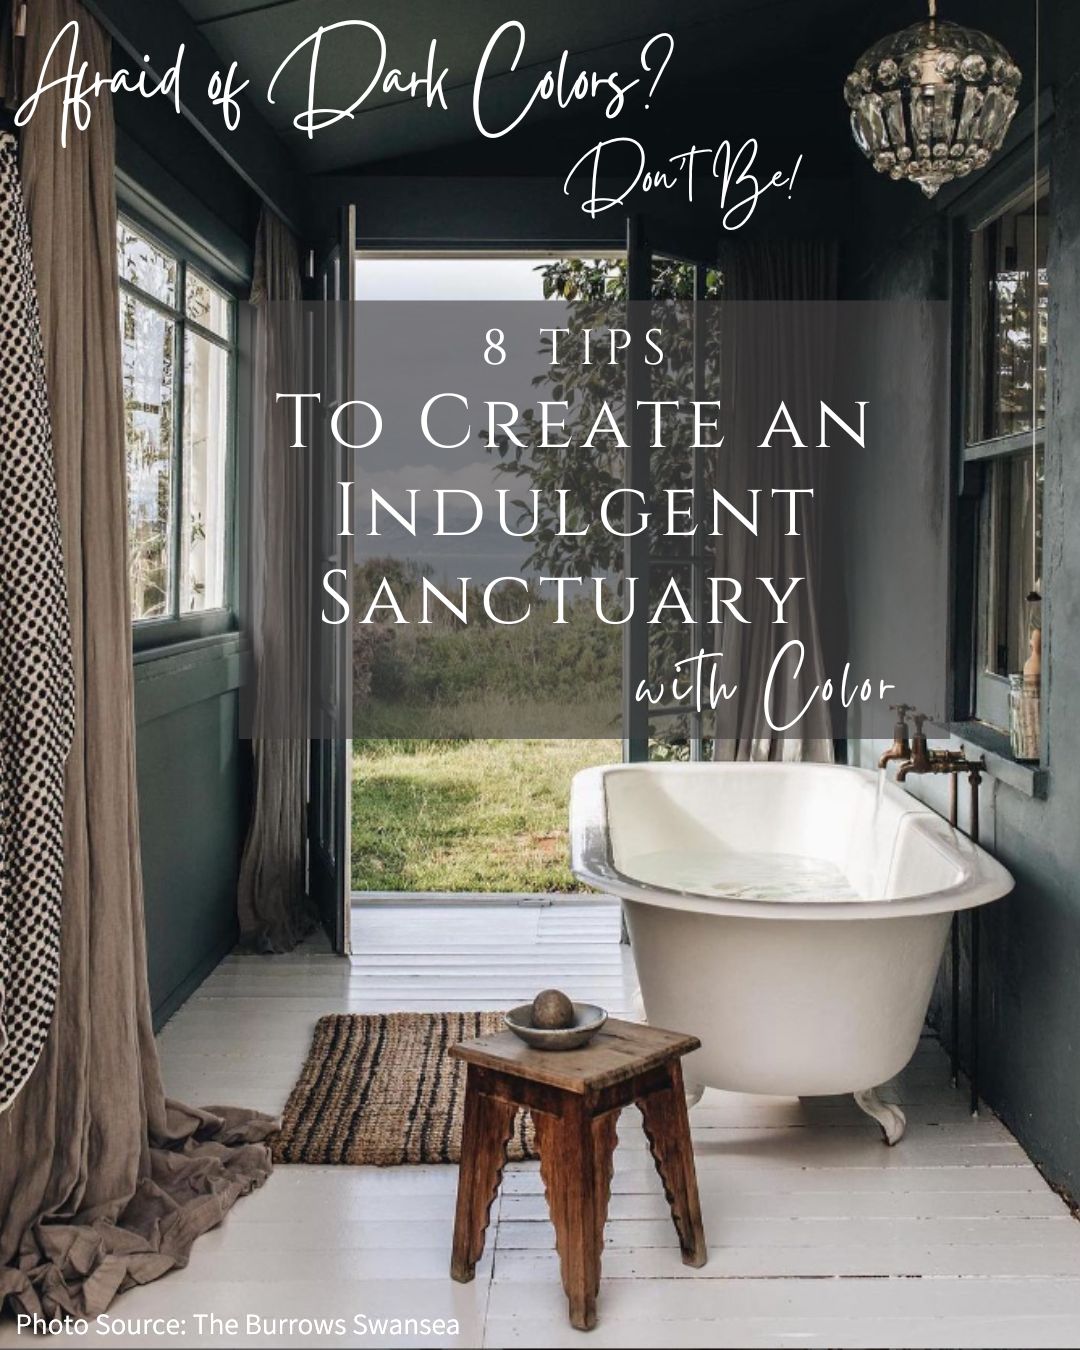 Afraid of Dark Colors? Don't Be! 8 Tips To Create An Indulgent Sanctuary